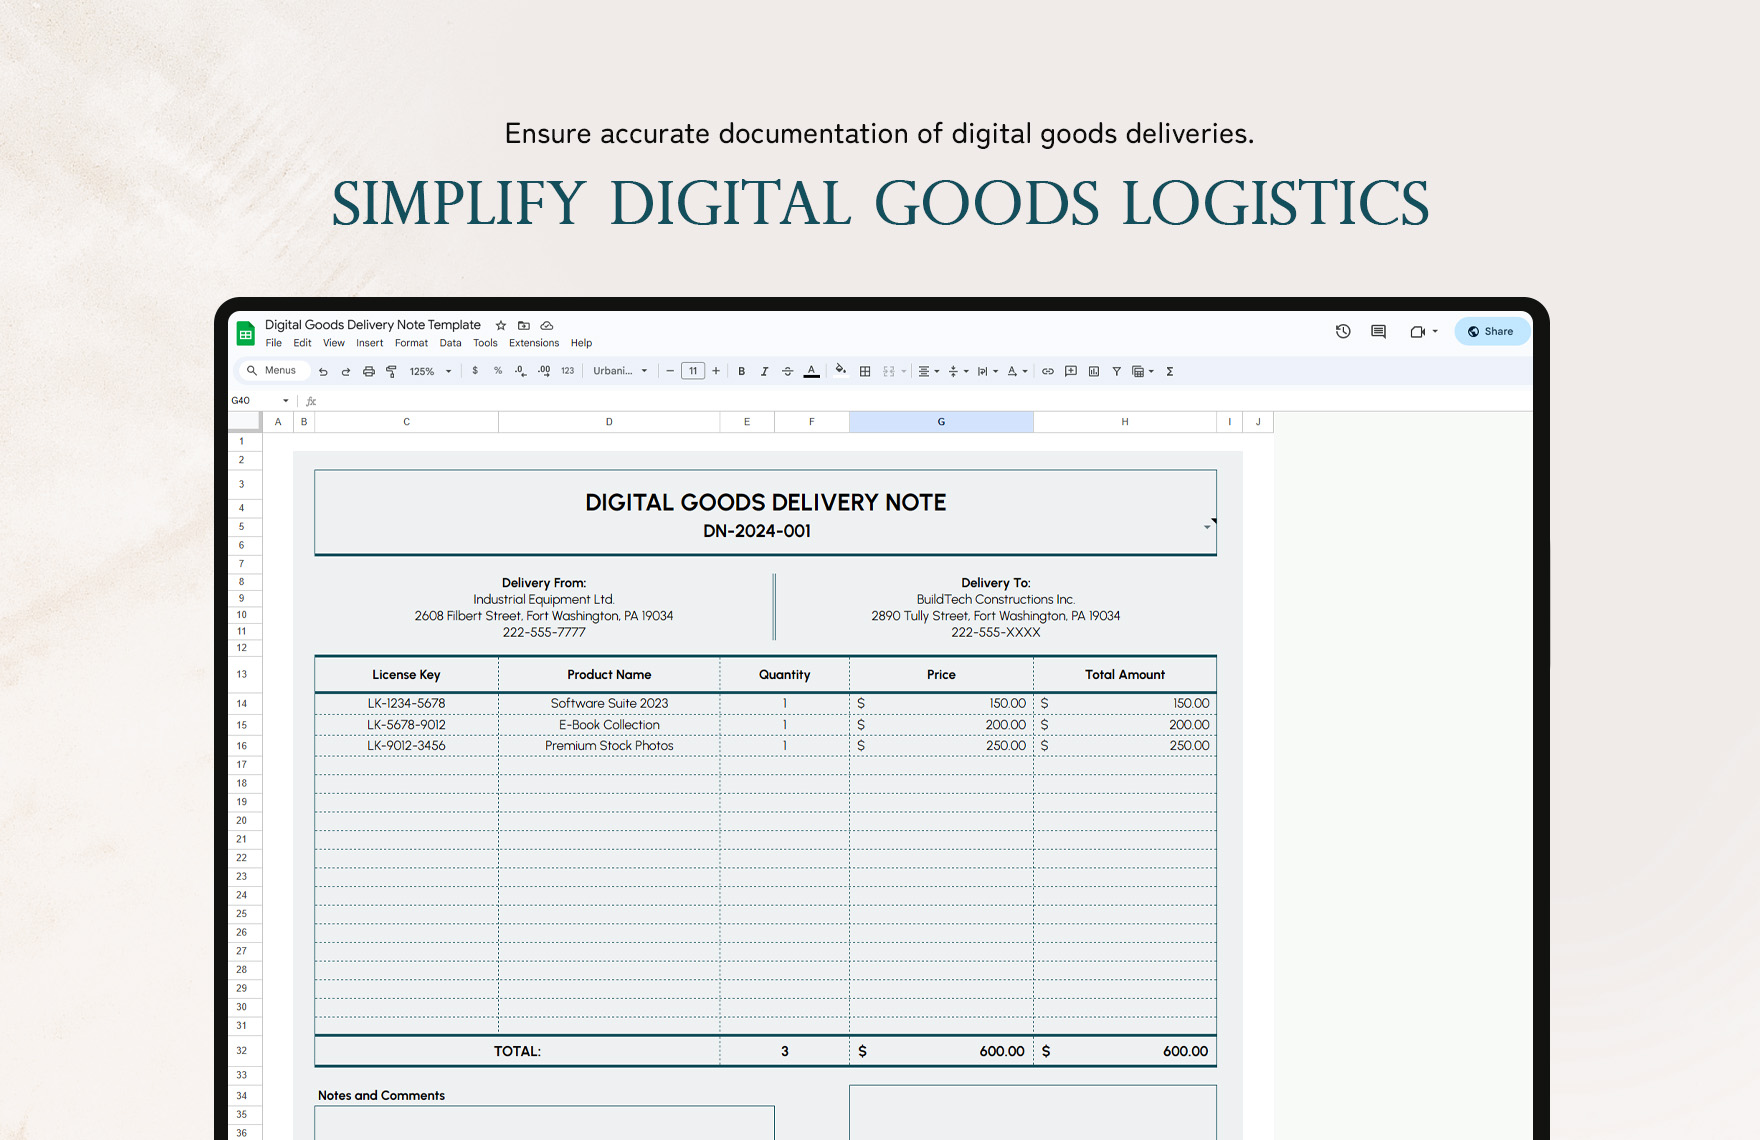 Digital Goods Delivery Note Template